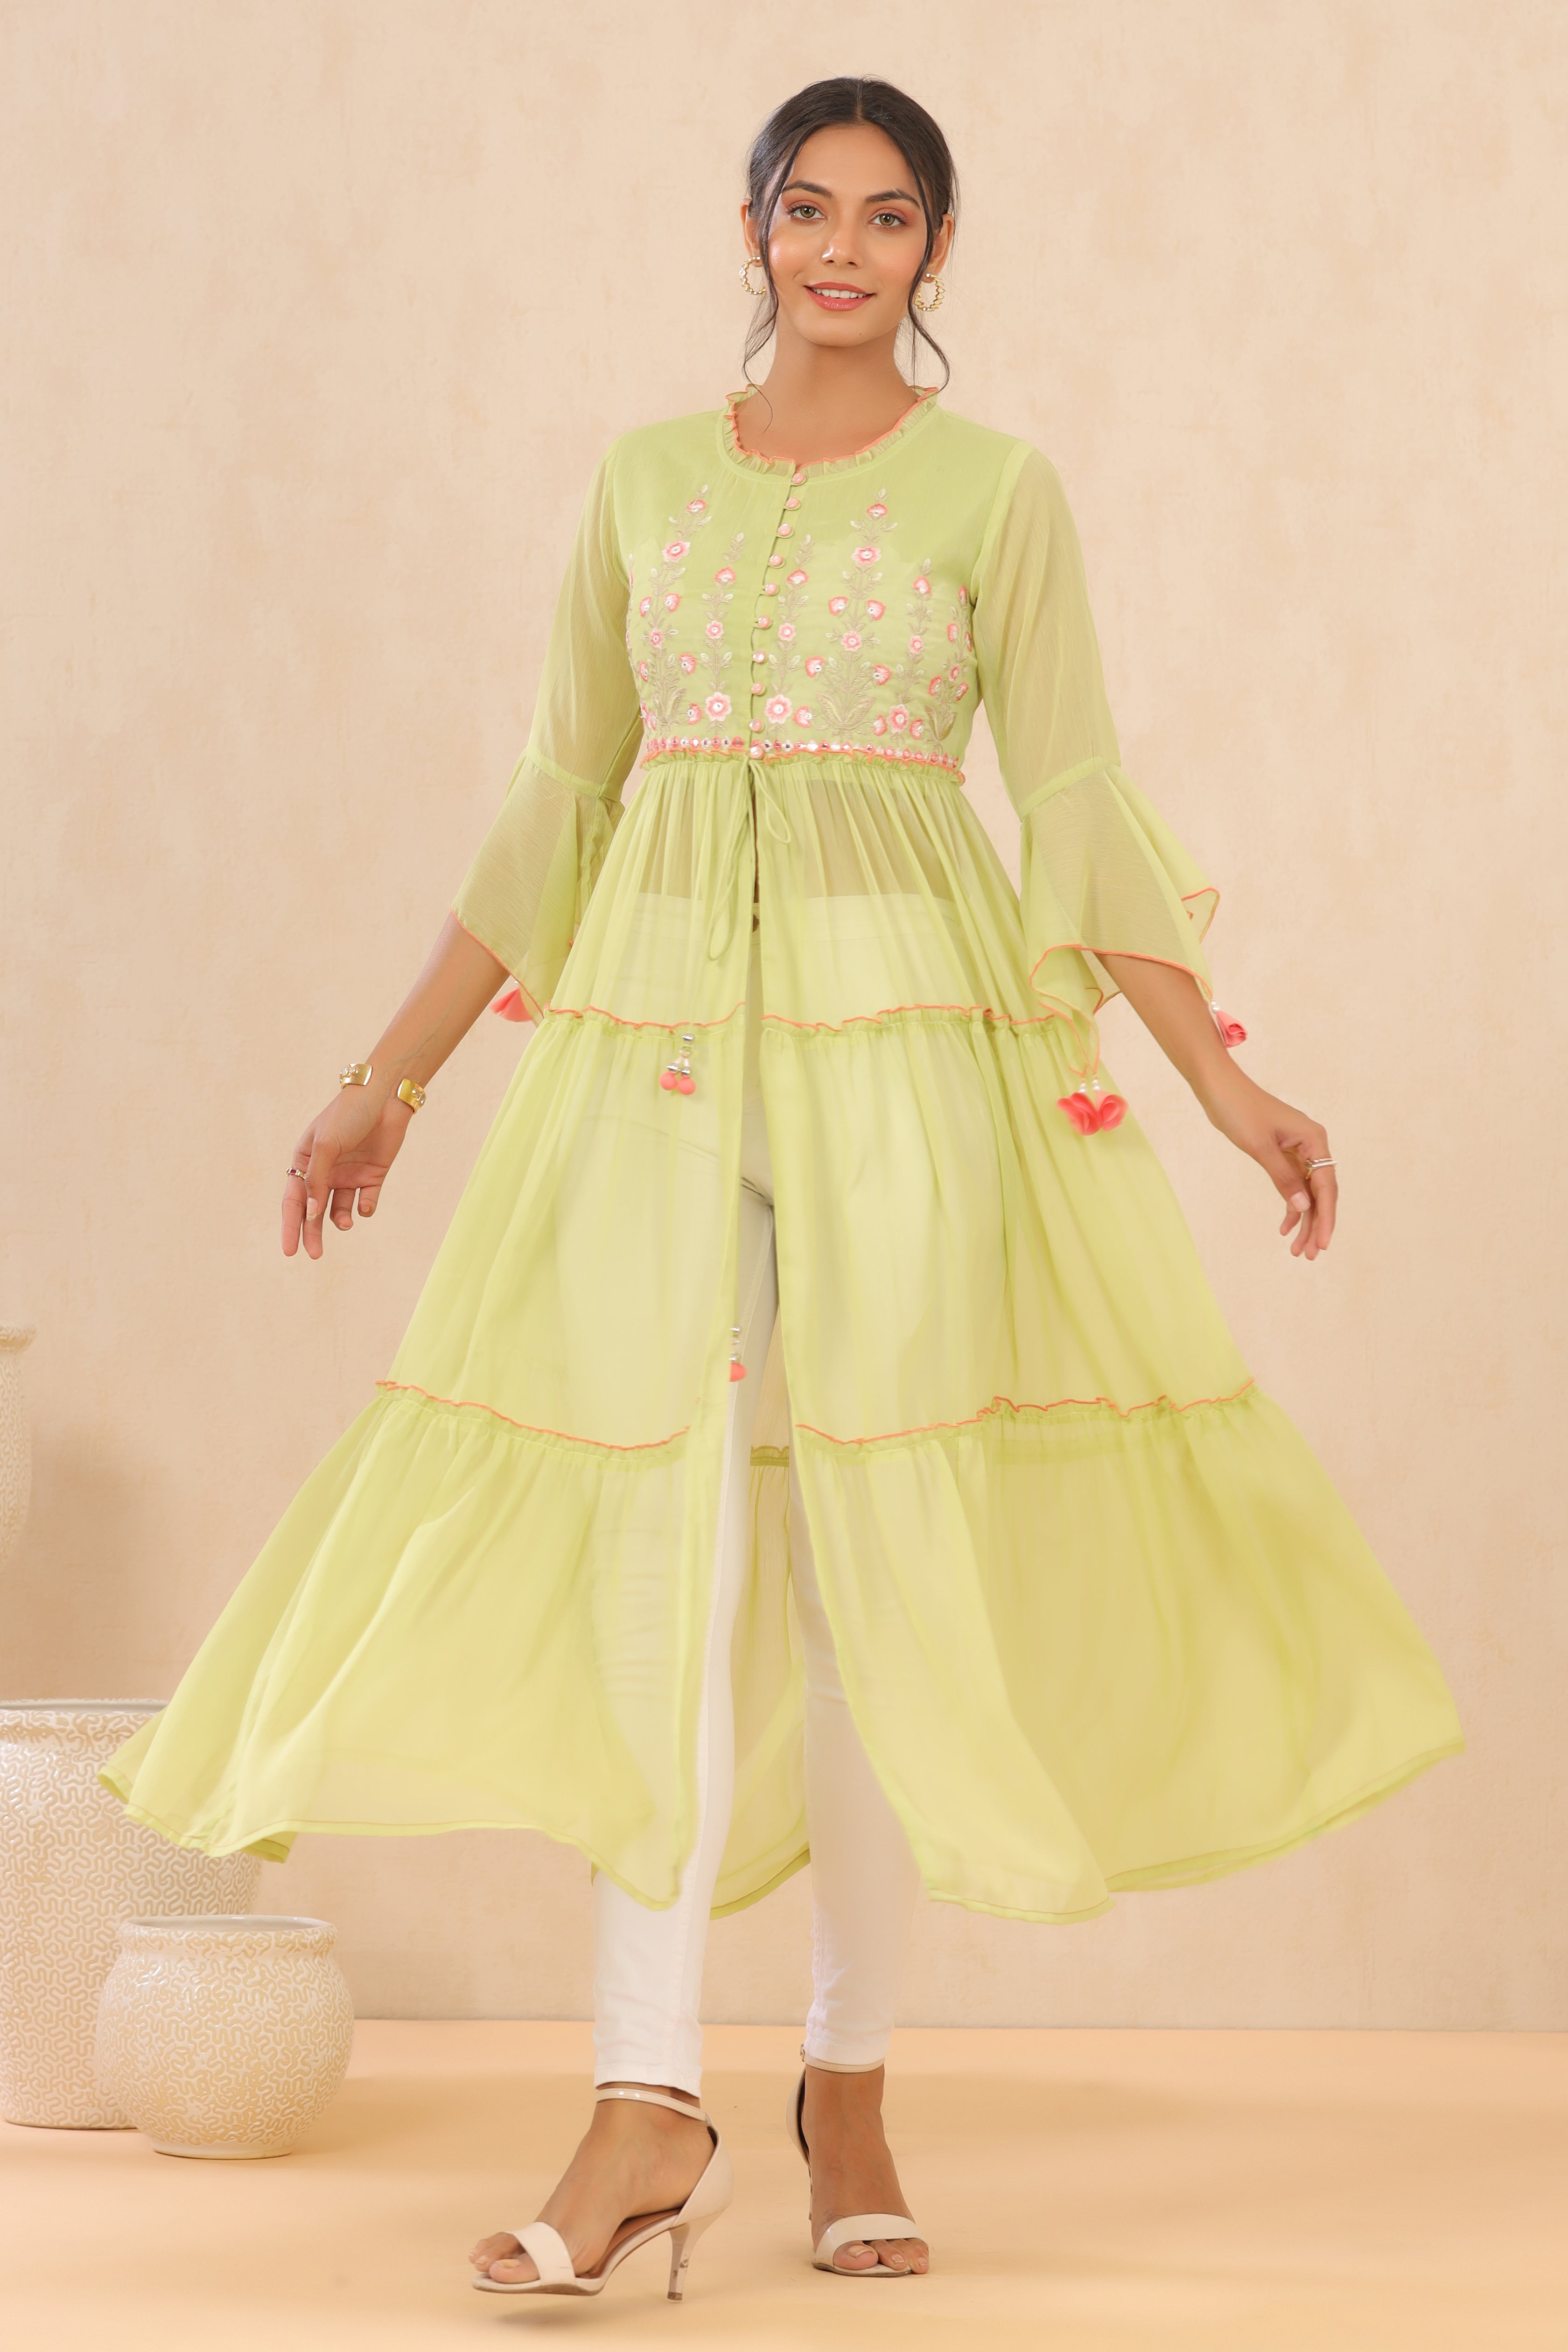 Juniper Green Floral Printed Chiffon Tiered Kurta With Thread Work Embroidery